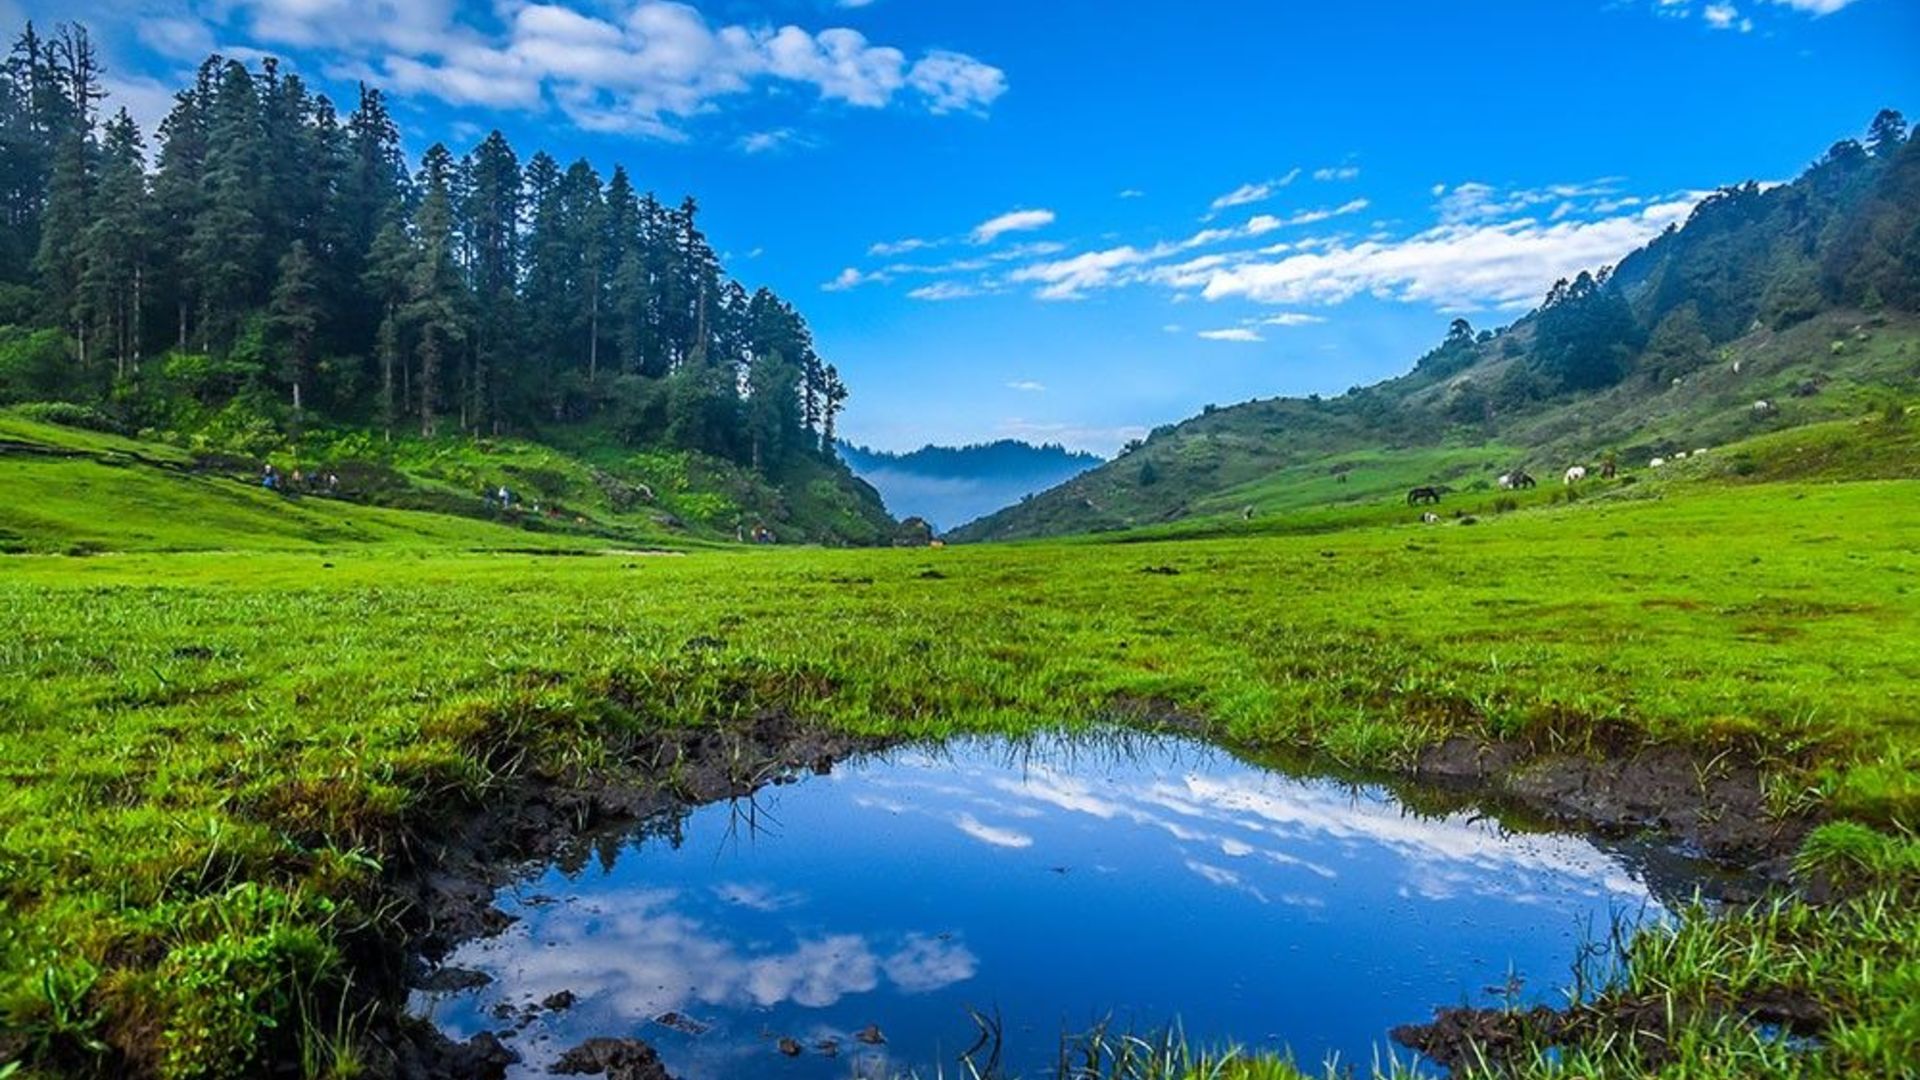 Explore day in Khaptad National Park. '